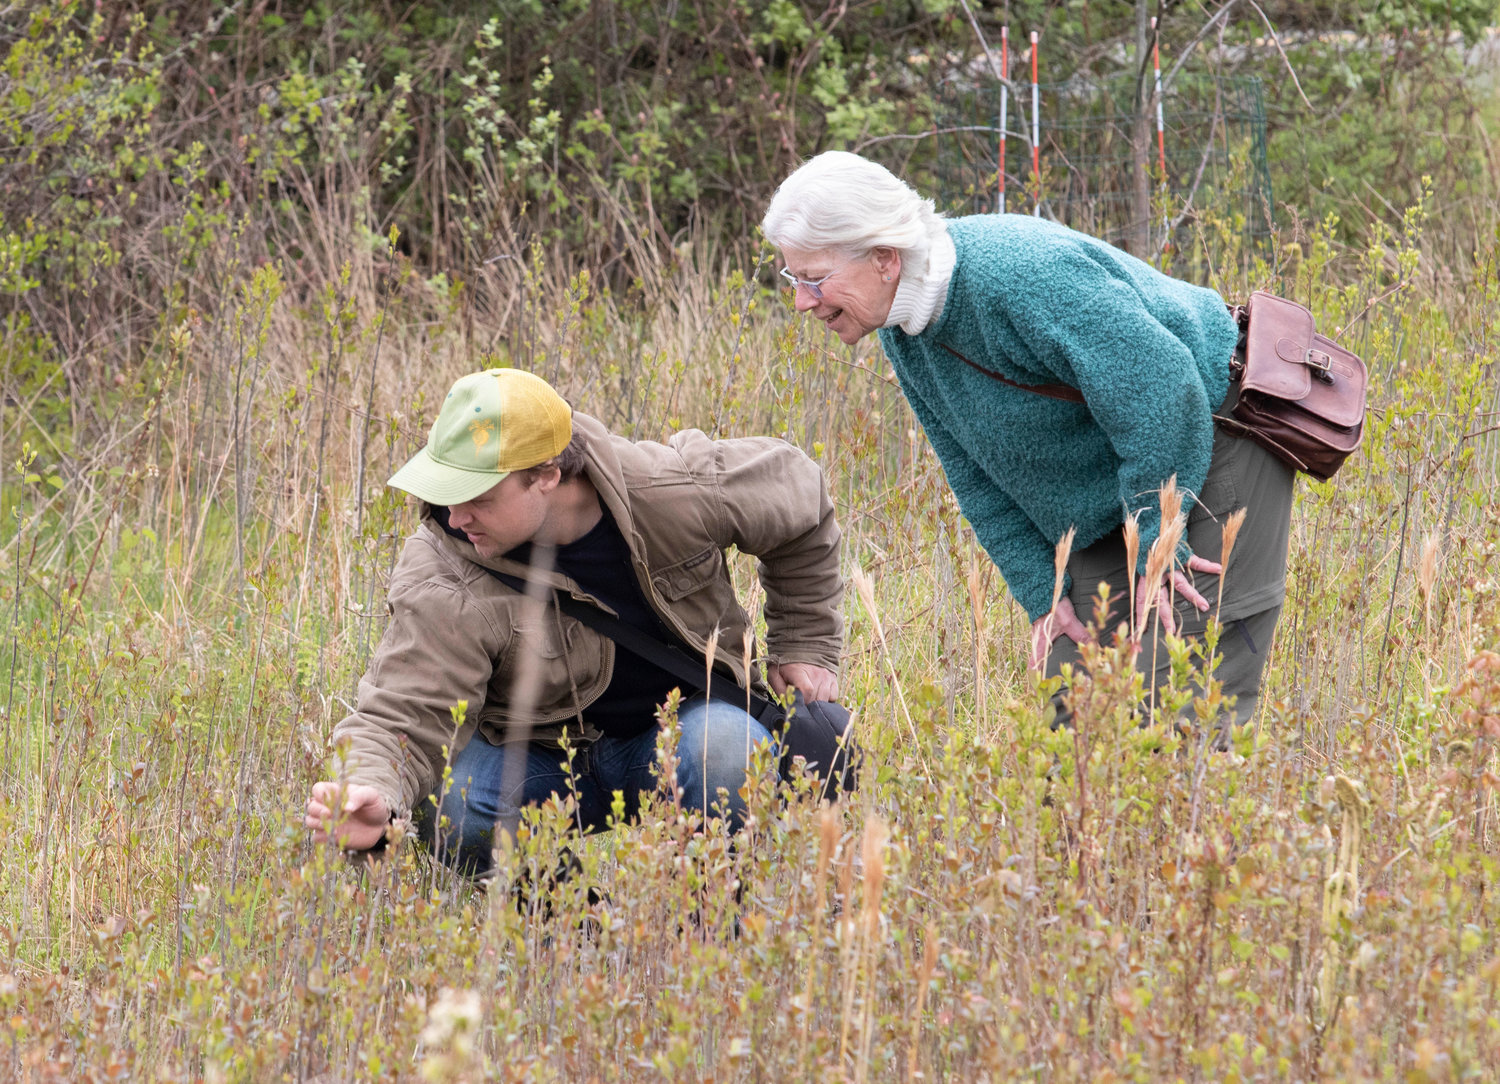 Gary Plunkett, of the Tiverton Open Space Commission, talks about native species with Sue Theriault of the Little Compton Tree Committee.